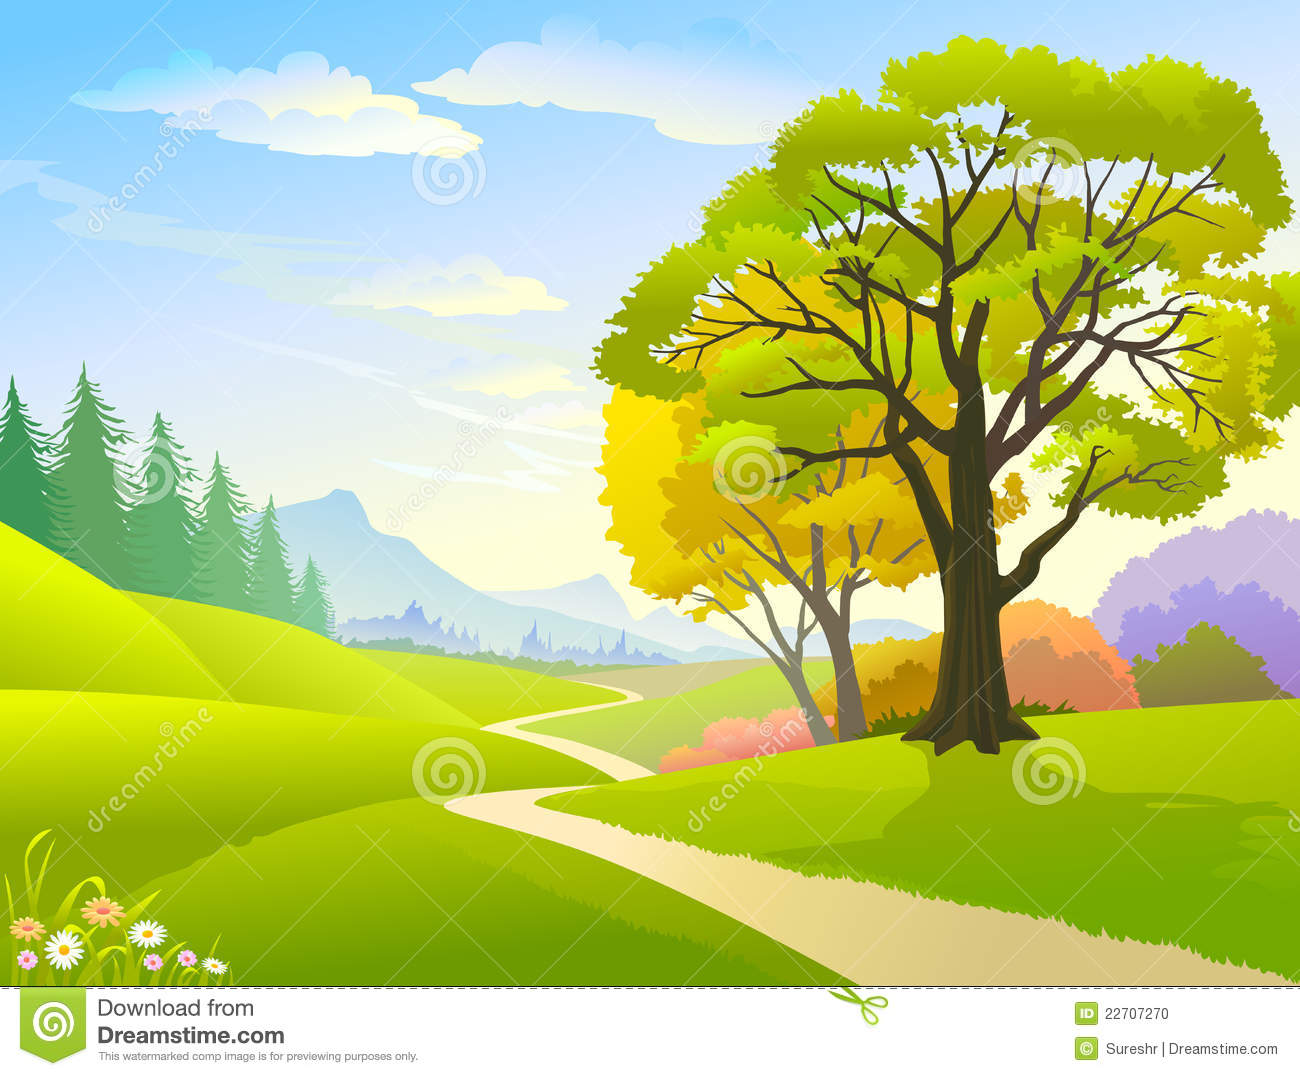 Pathway clipart - Clipground